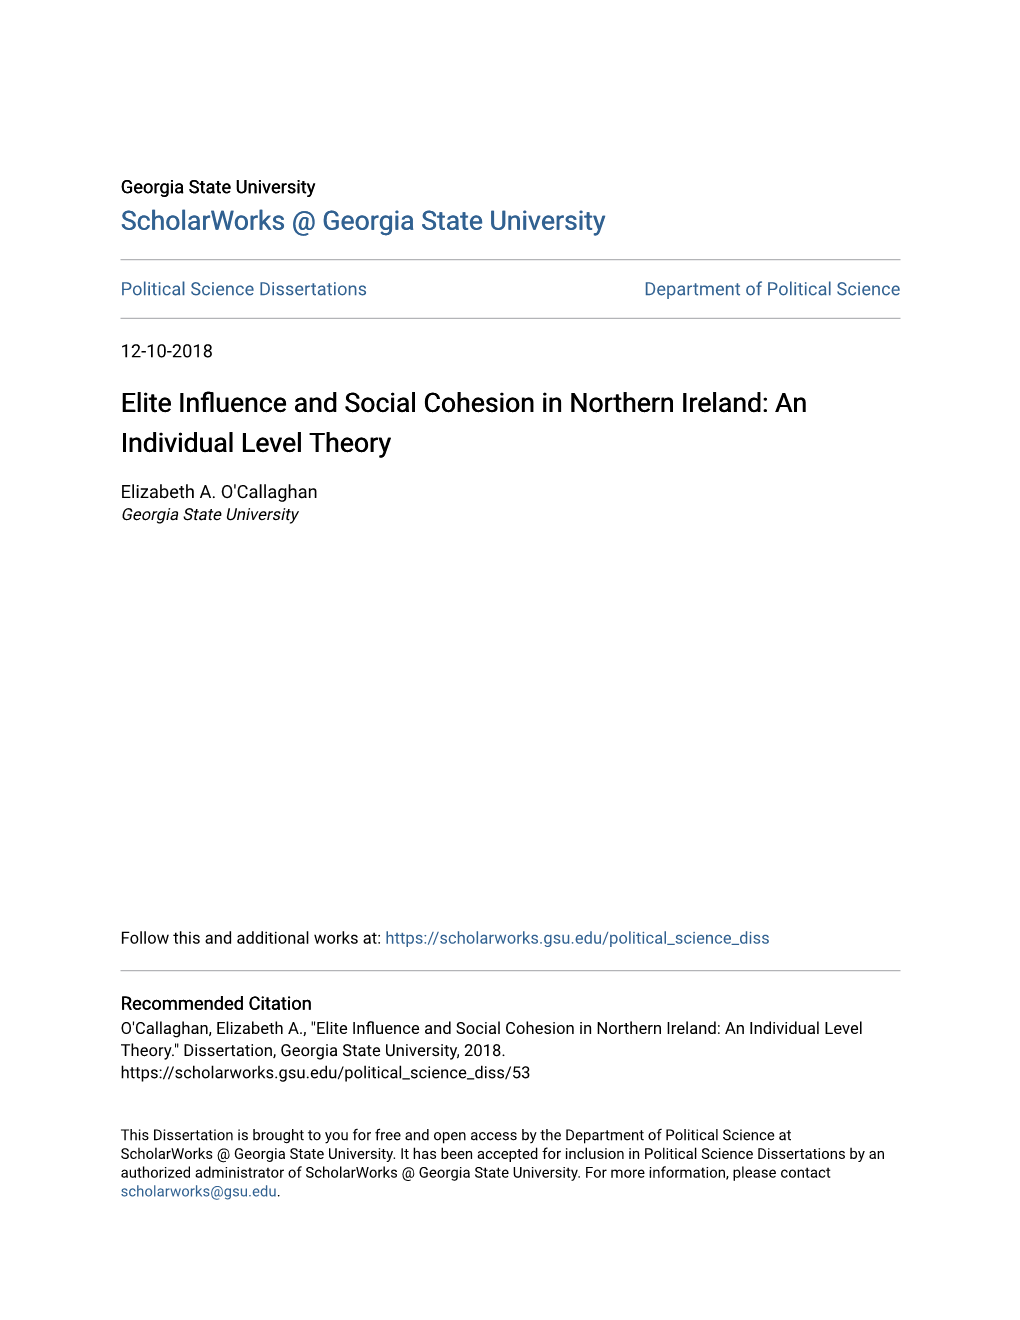 Elite Influence and Social Cohesion in Northern Ireland: an Individual Level Theory